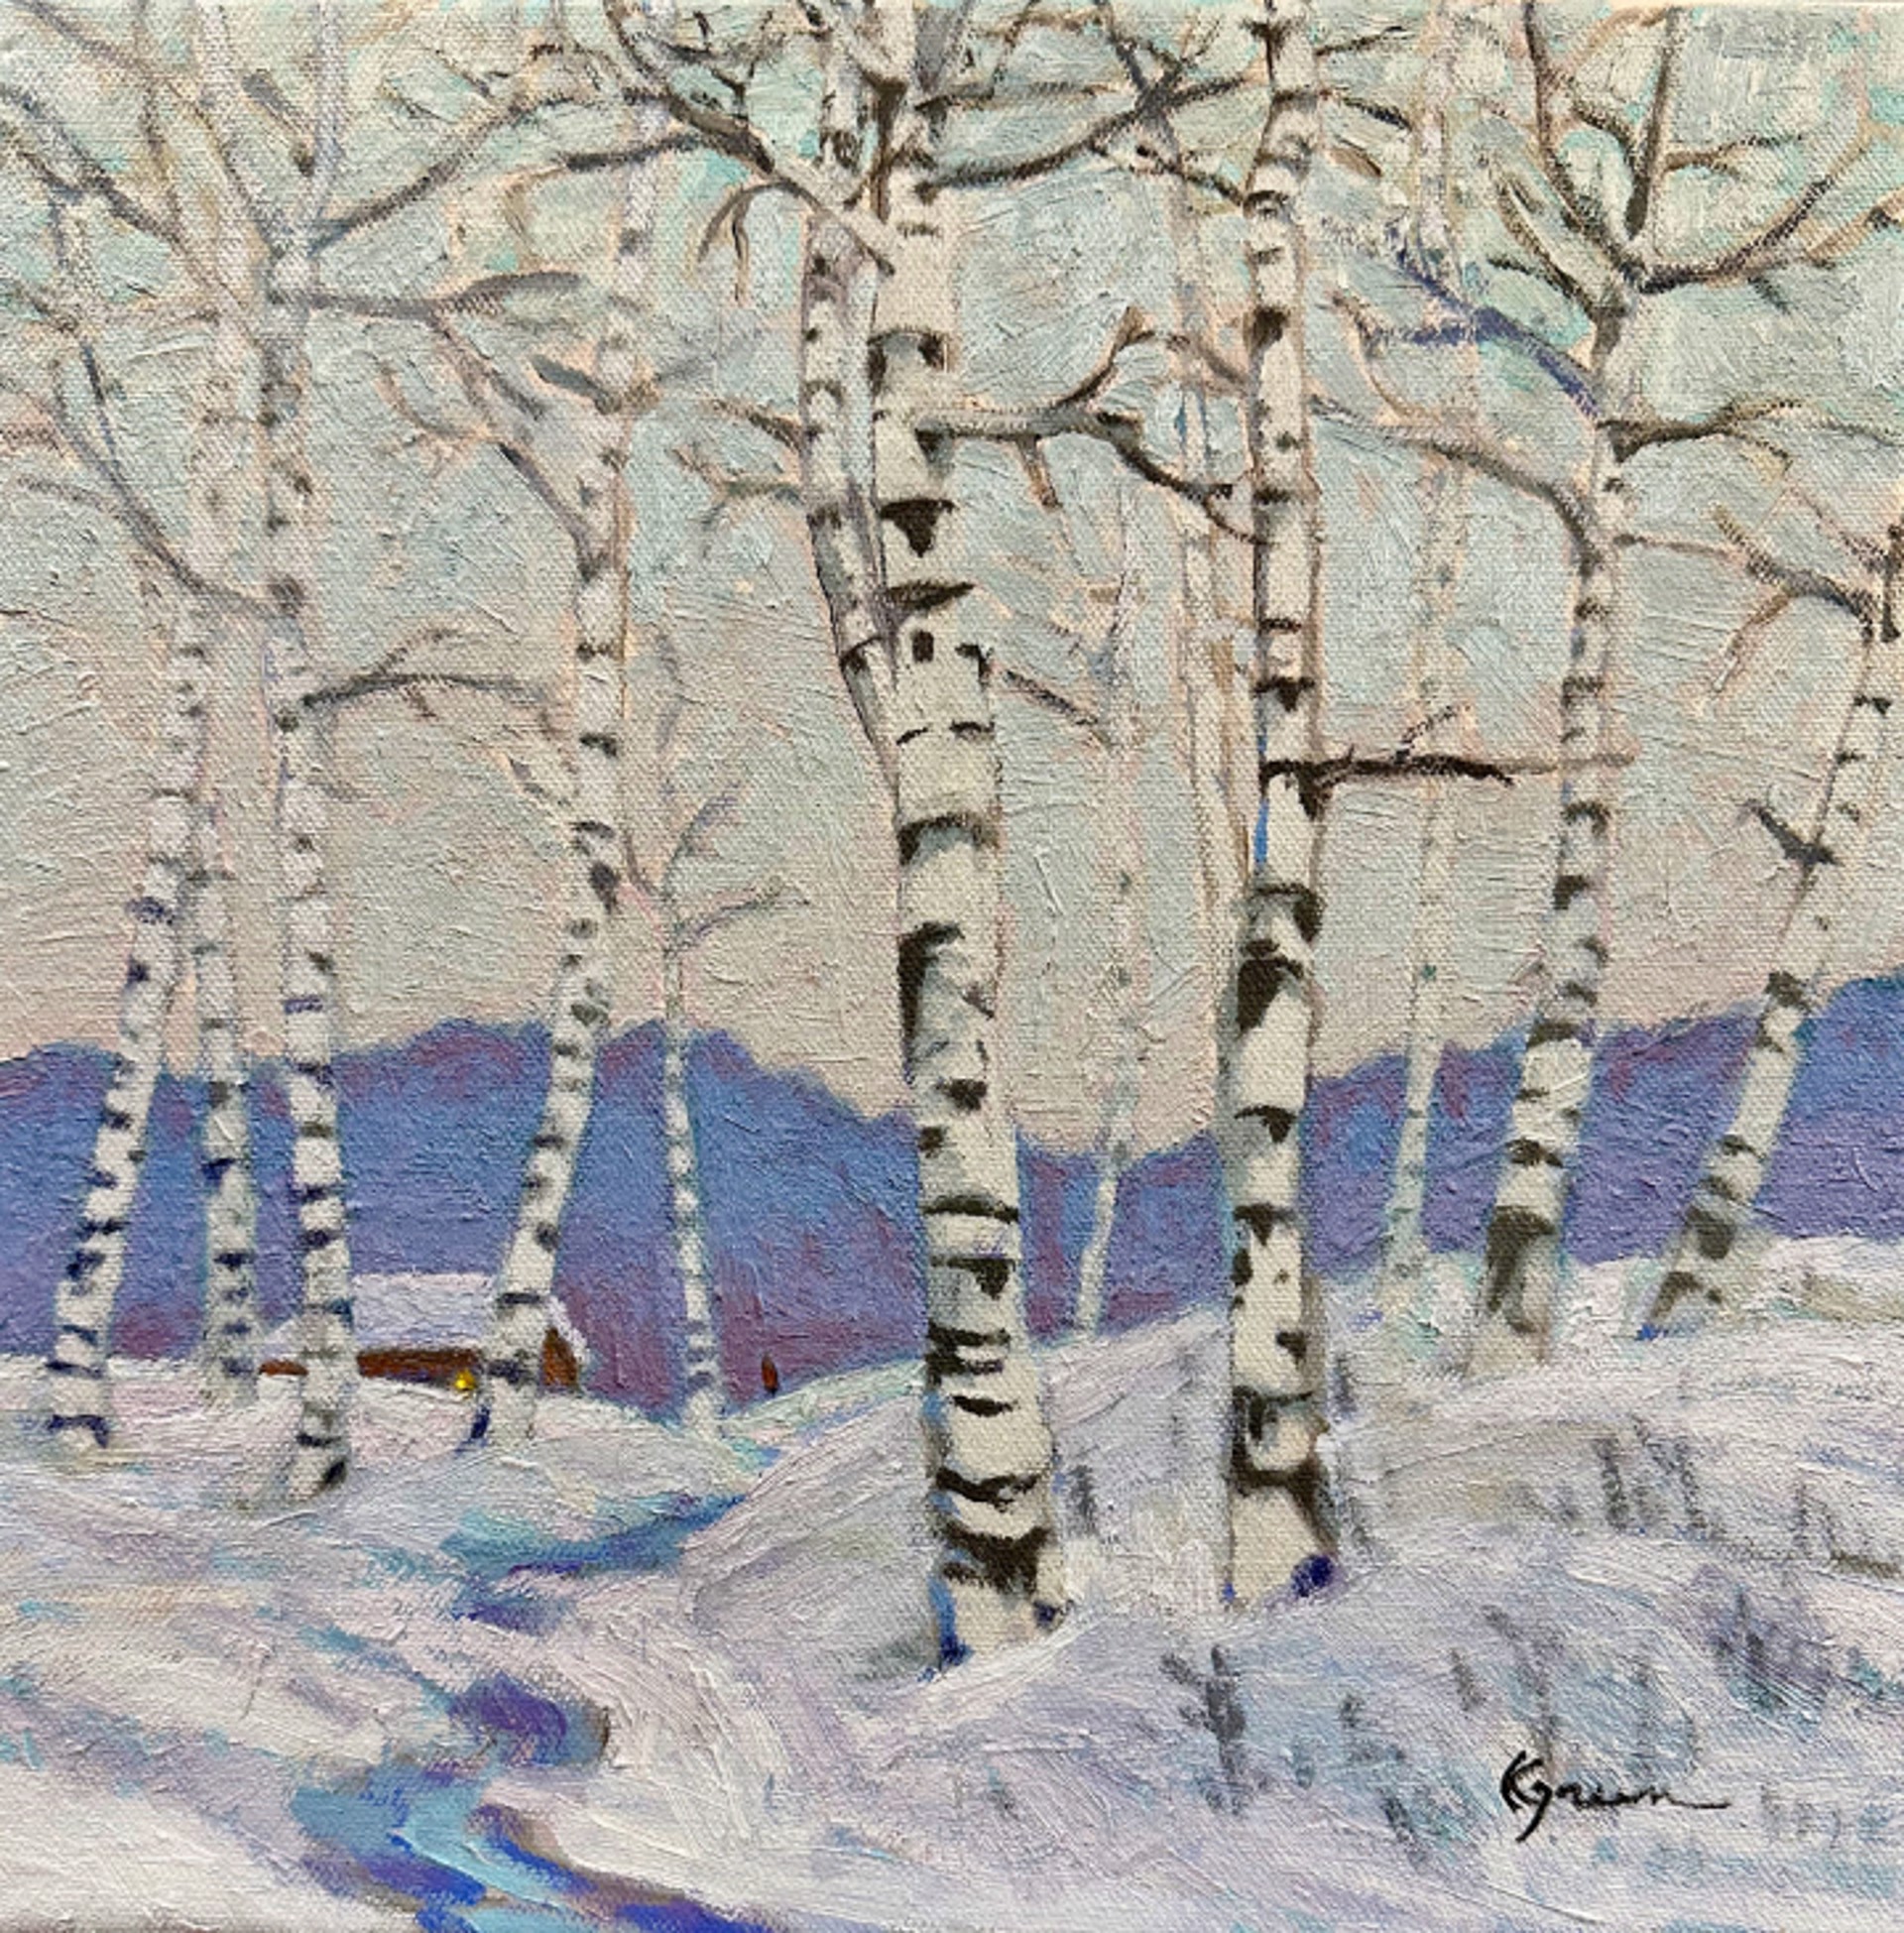 Winter Silence by Kenneth Green